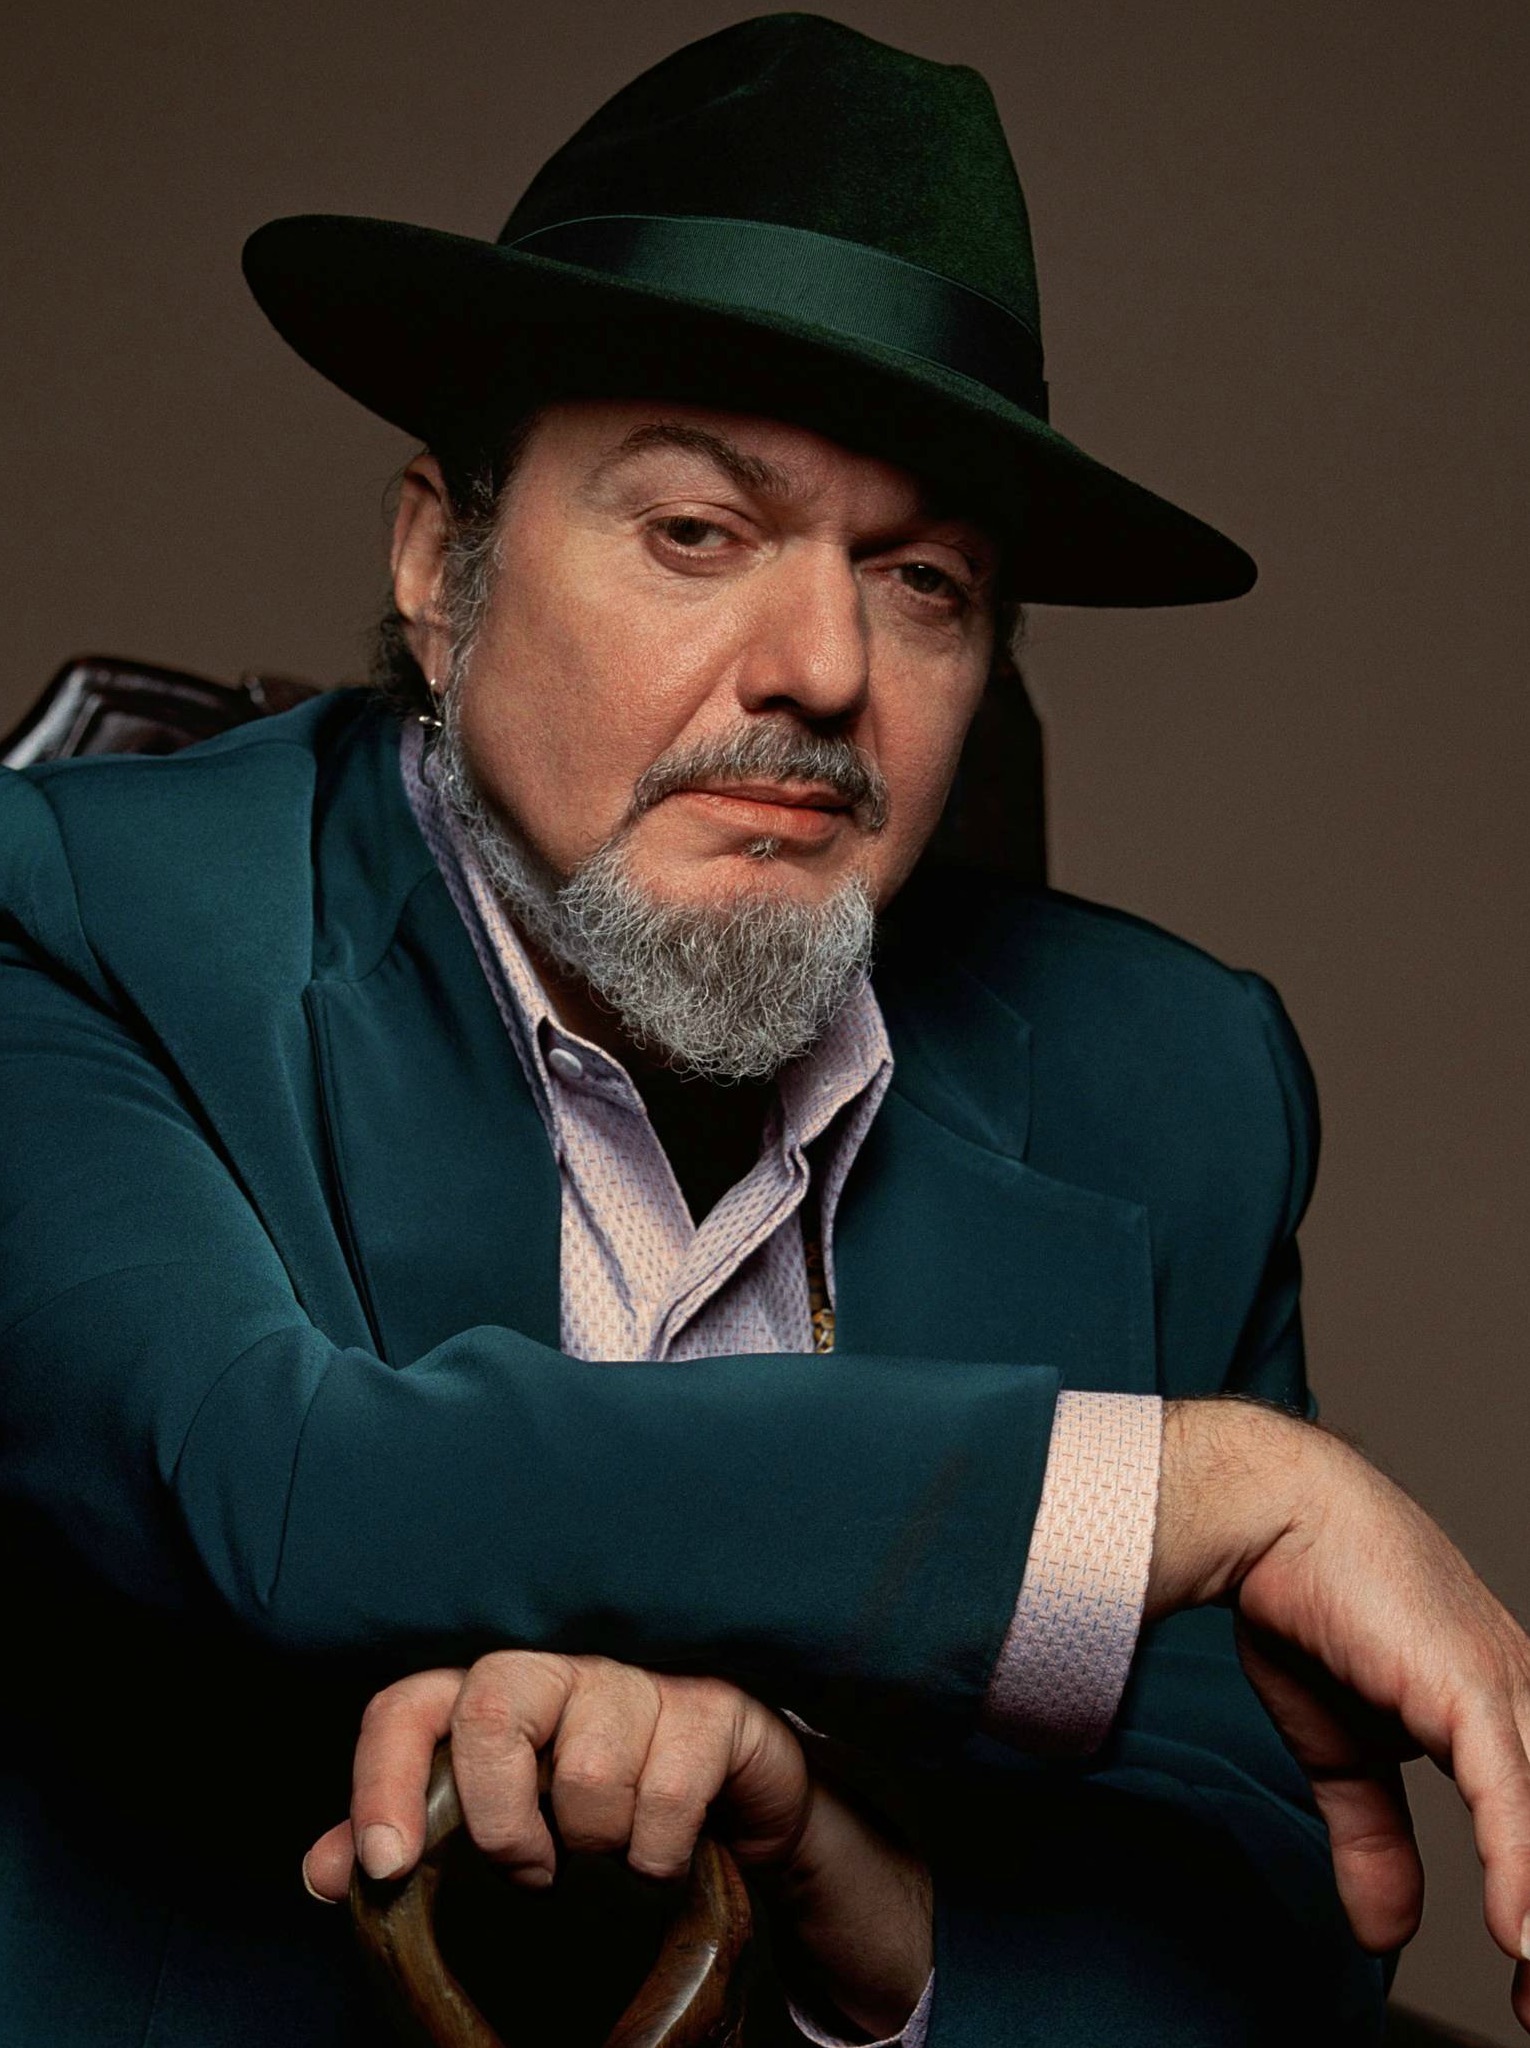 LEGEND...Dr John fuses jazz, blues, zydeco and rock n' roll